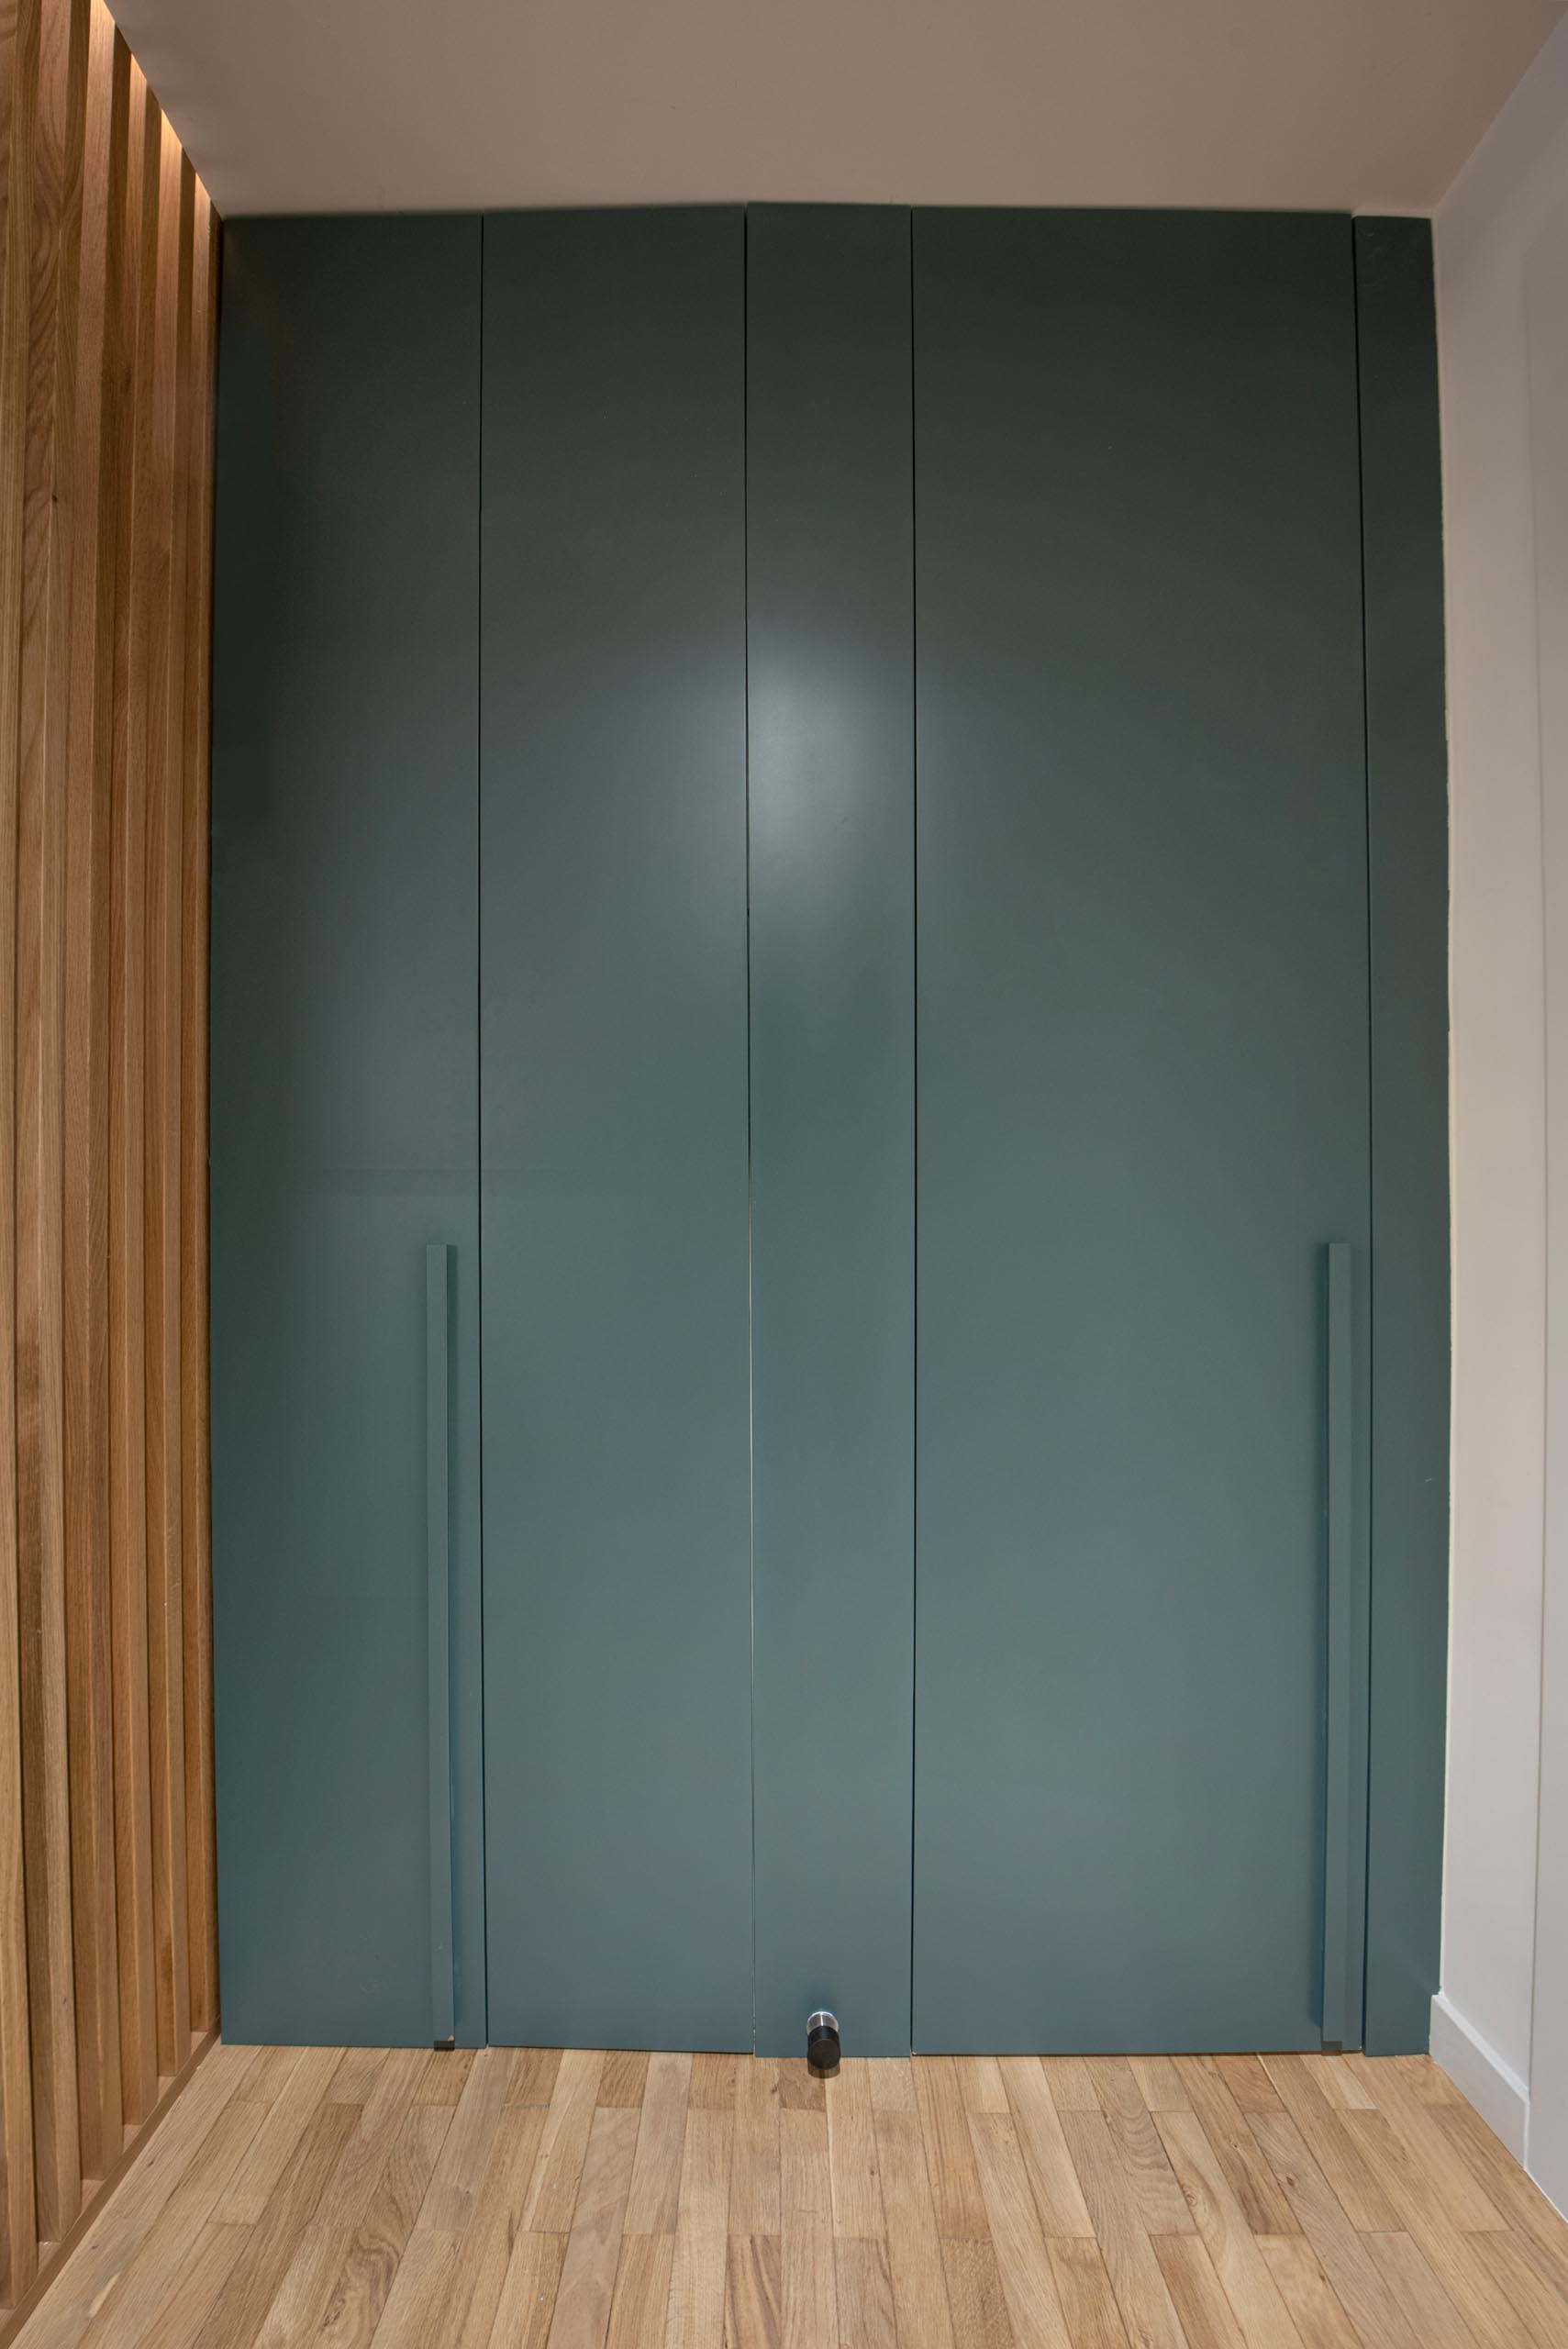 This modern home includes a three-door wardrobe in a eucalyptus green finish, that hides a minimal, functional and attractive powder room